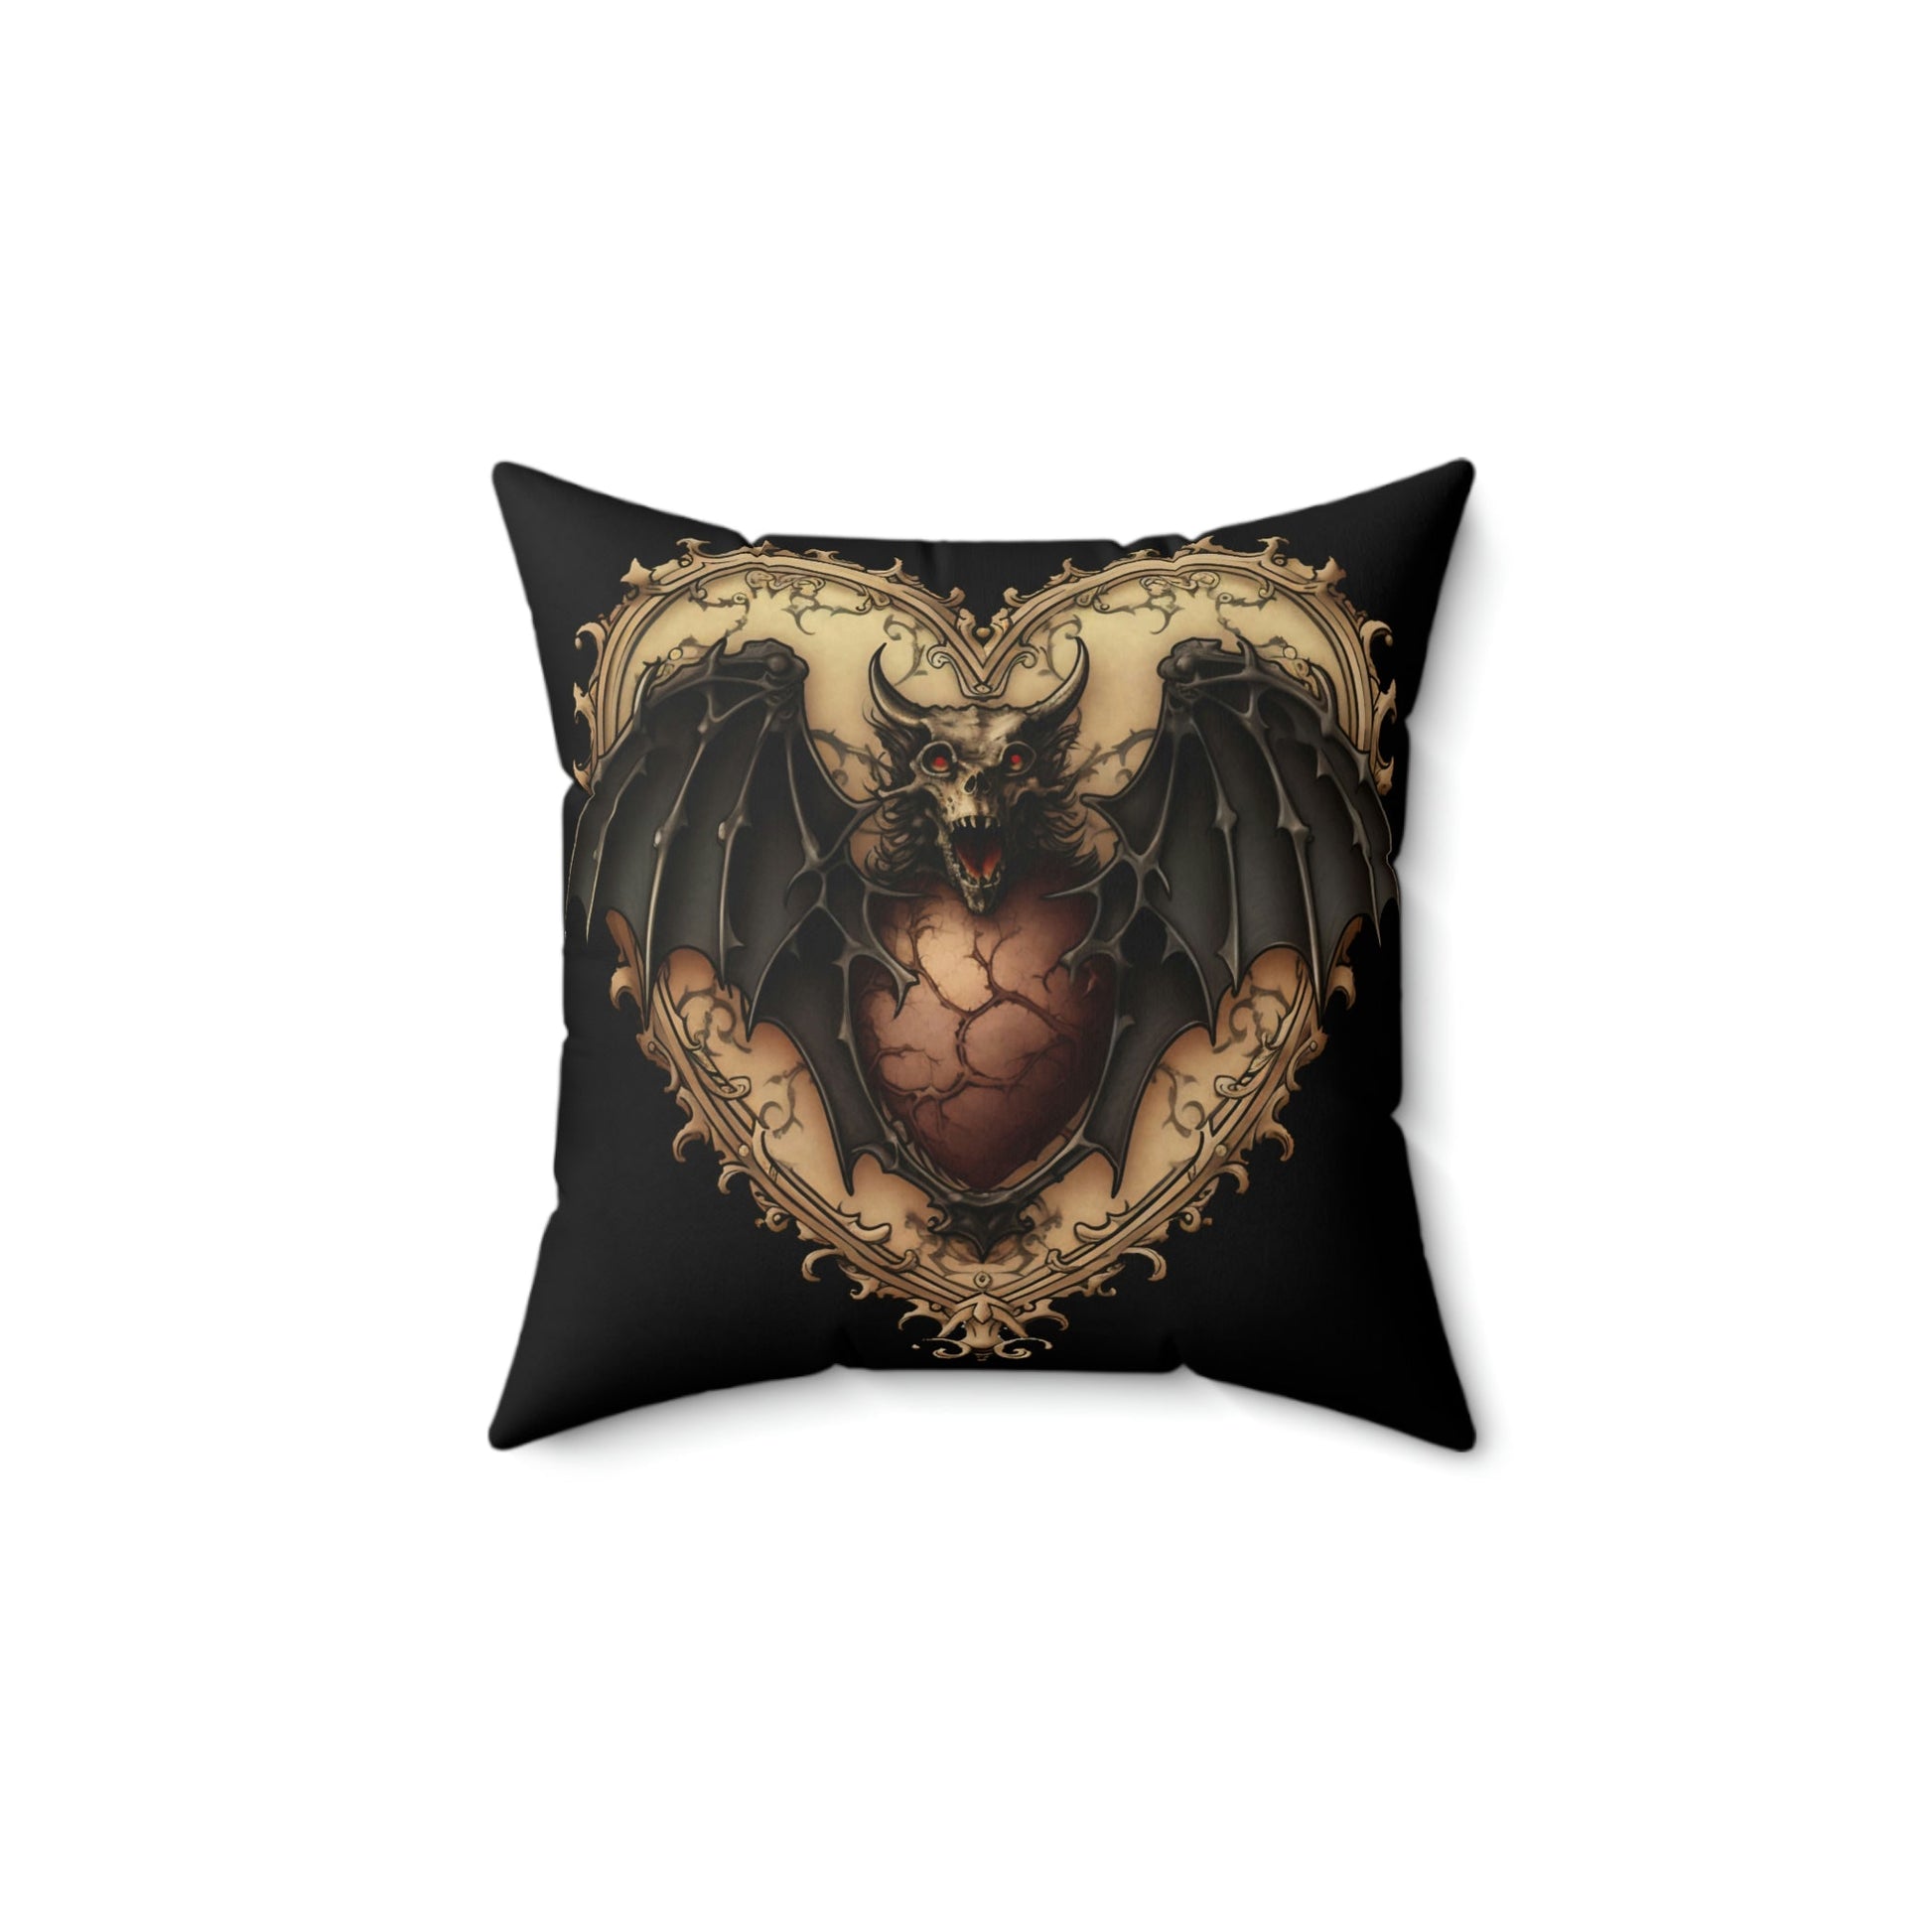 Gothic Bat Heart Design Square Pillow - Goblincore Goth Style Gift for Yourself or Your Witchy Loved Ones